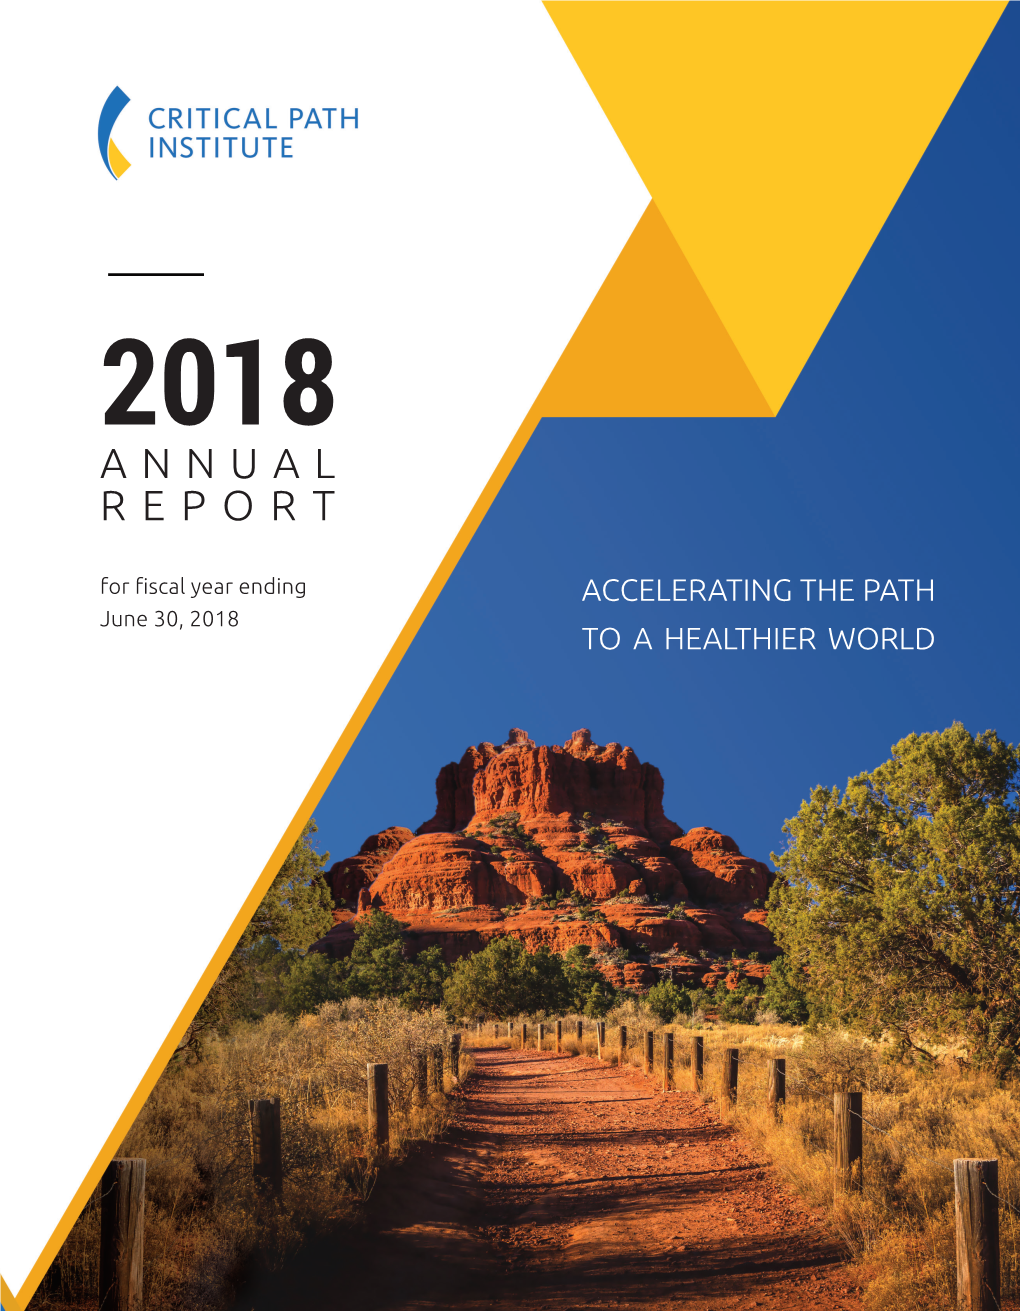 ANNUAL REPORT for Fiscal Year Ending ACCELERATING the PATH June 30, 2018 to a HEALTHIER WORLD 2 Critical Path Institute - Annual Report - 2017-2018